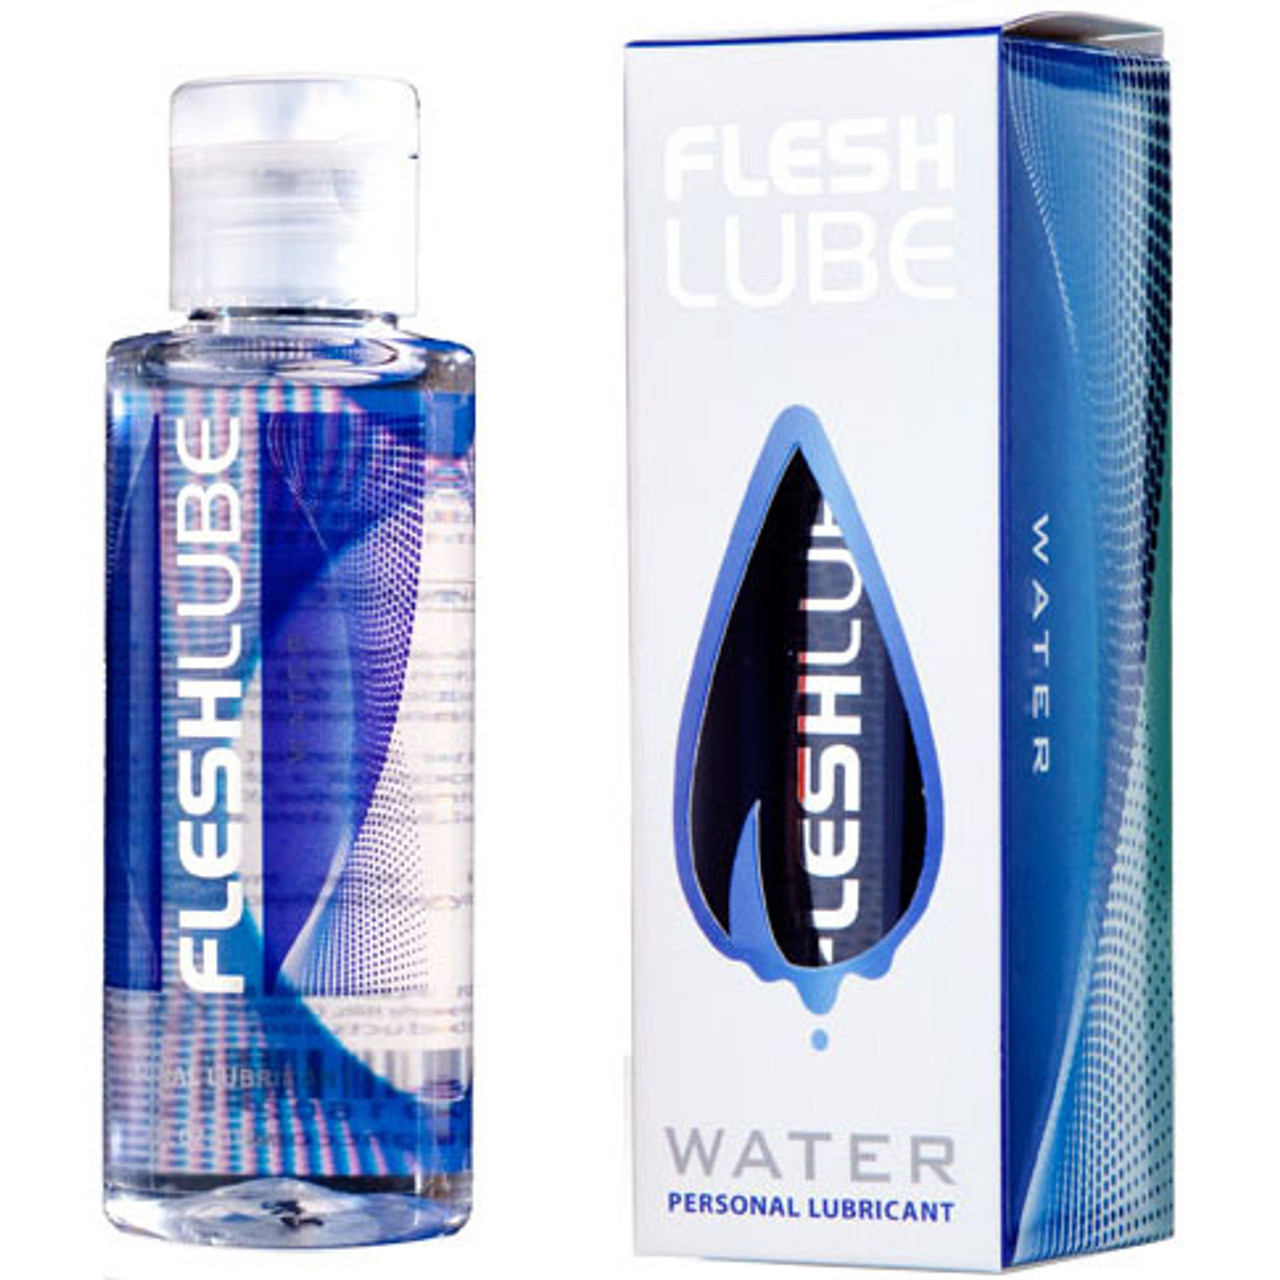 Buy the Complete Male Masturbator Care Kit with FleshLube Water